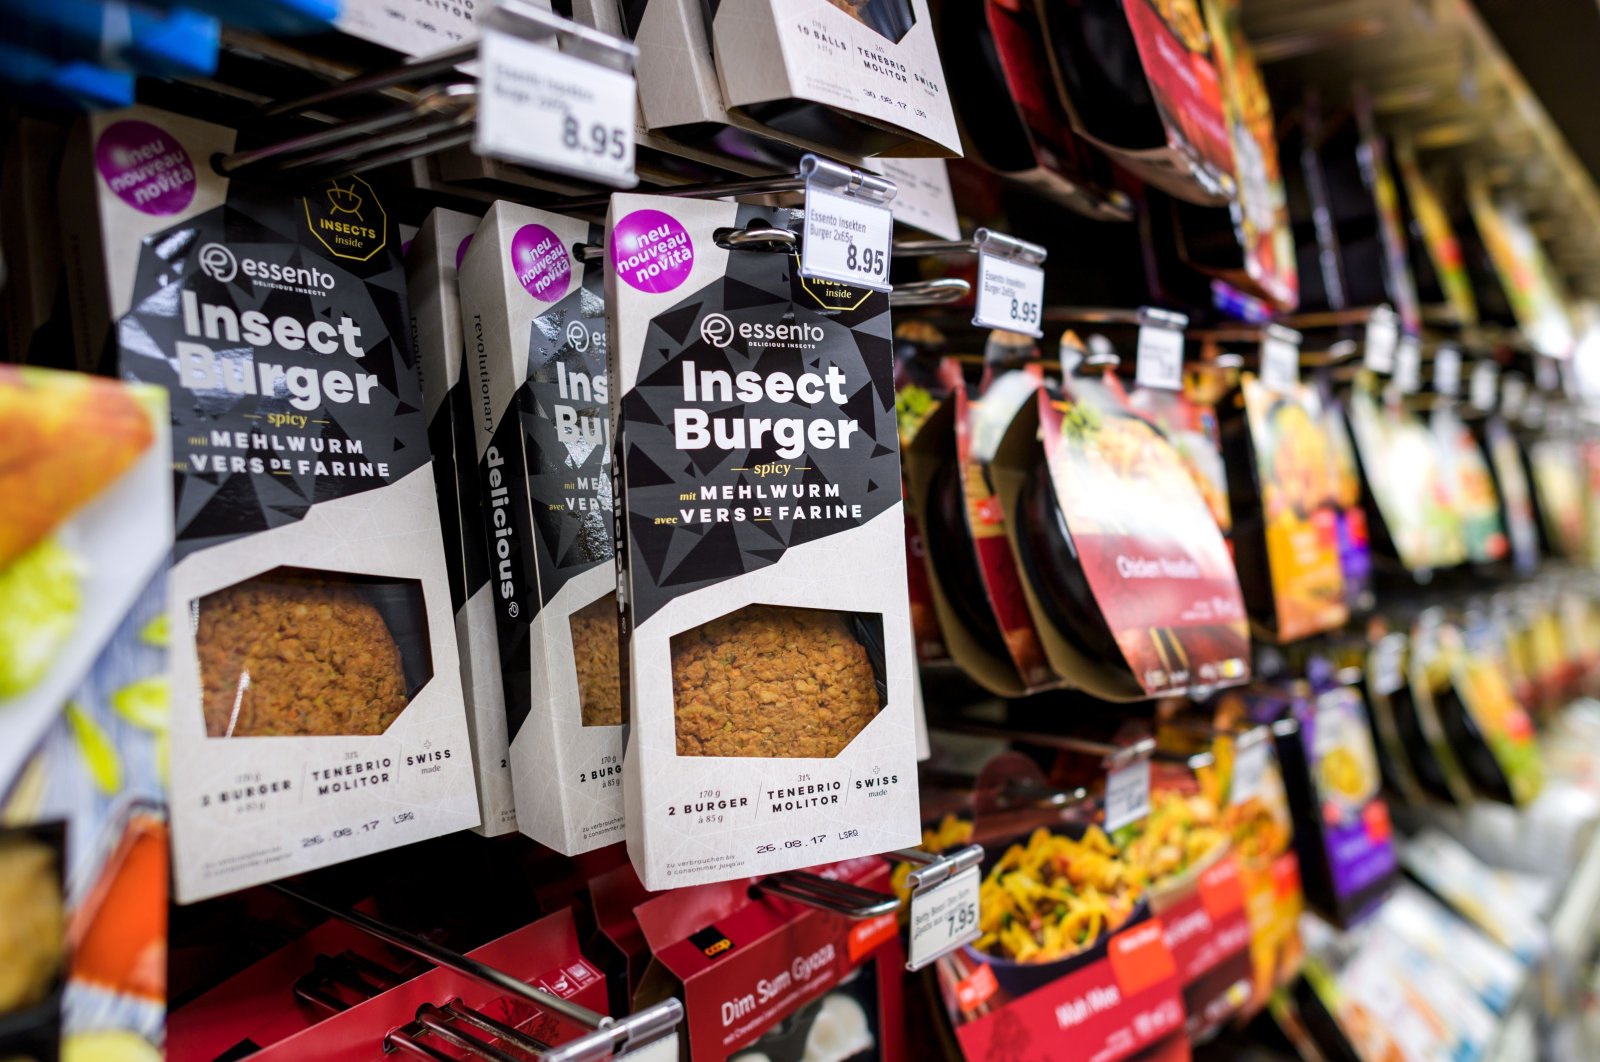 In this file photo taken on Aug. 21, 2017, packs of precooked insect burgers based on protein-rich mealworm are seen on a supermarket shelf in Geneva, Switzerland. (AFP Photo)